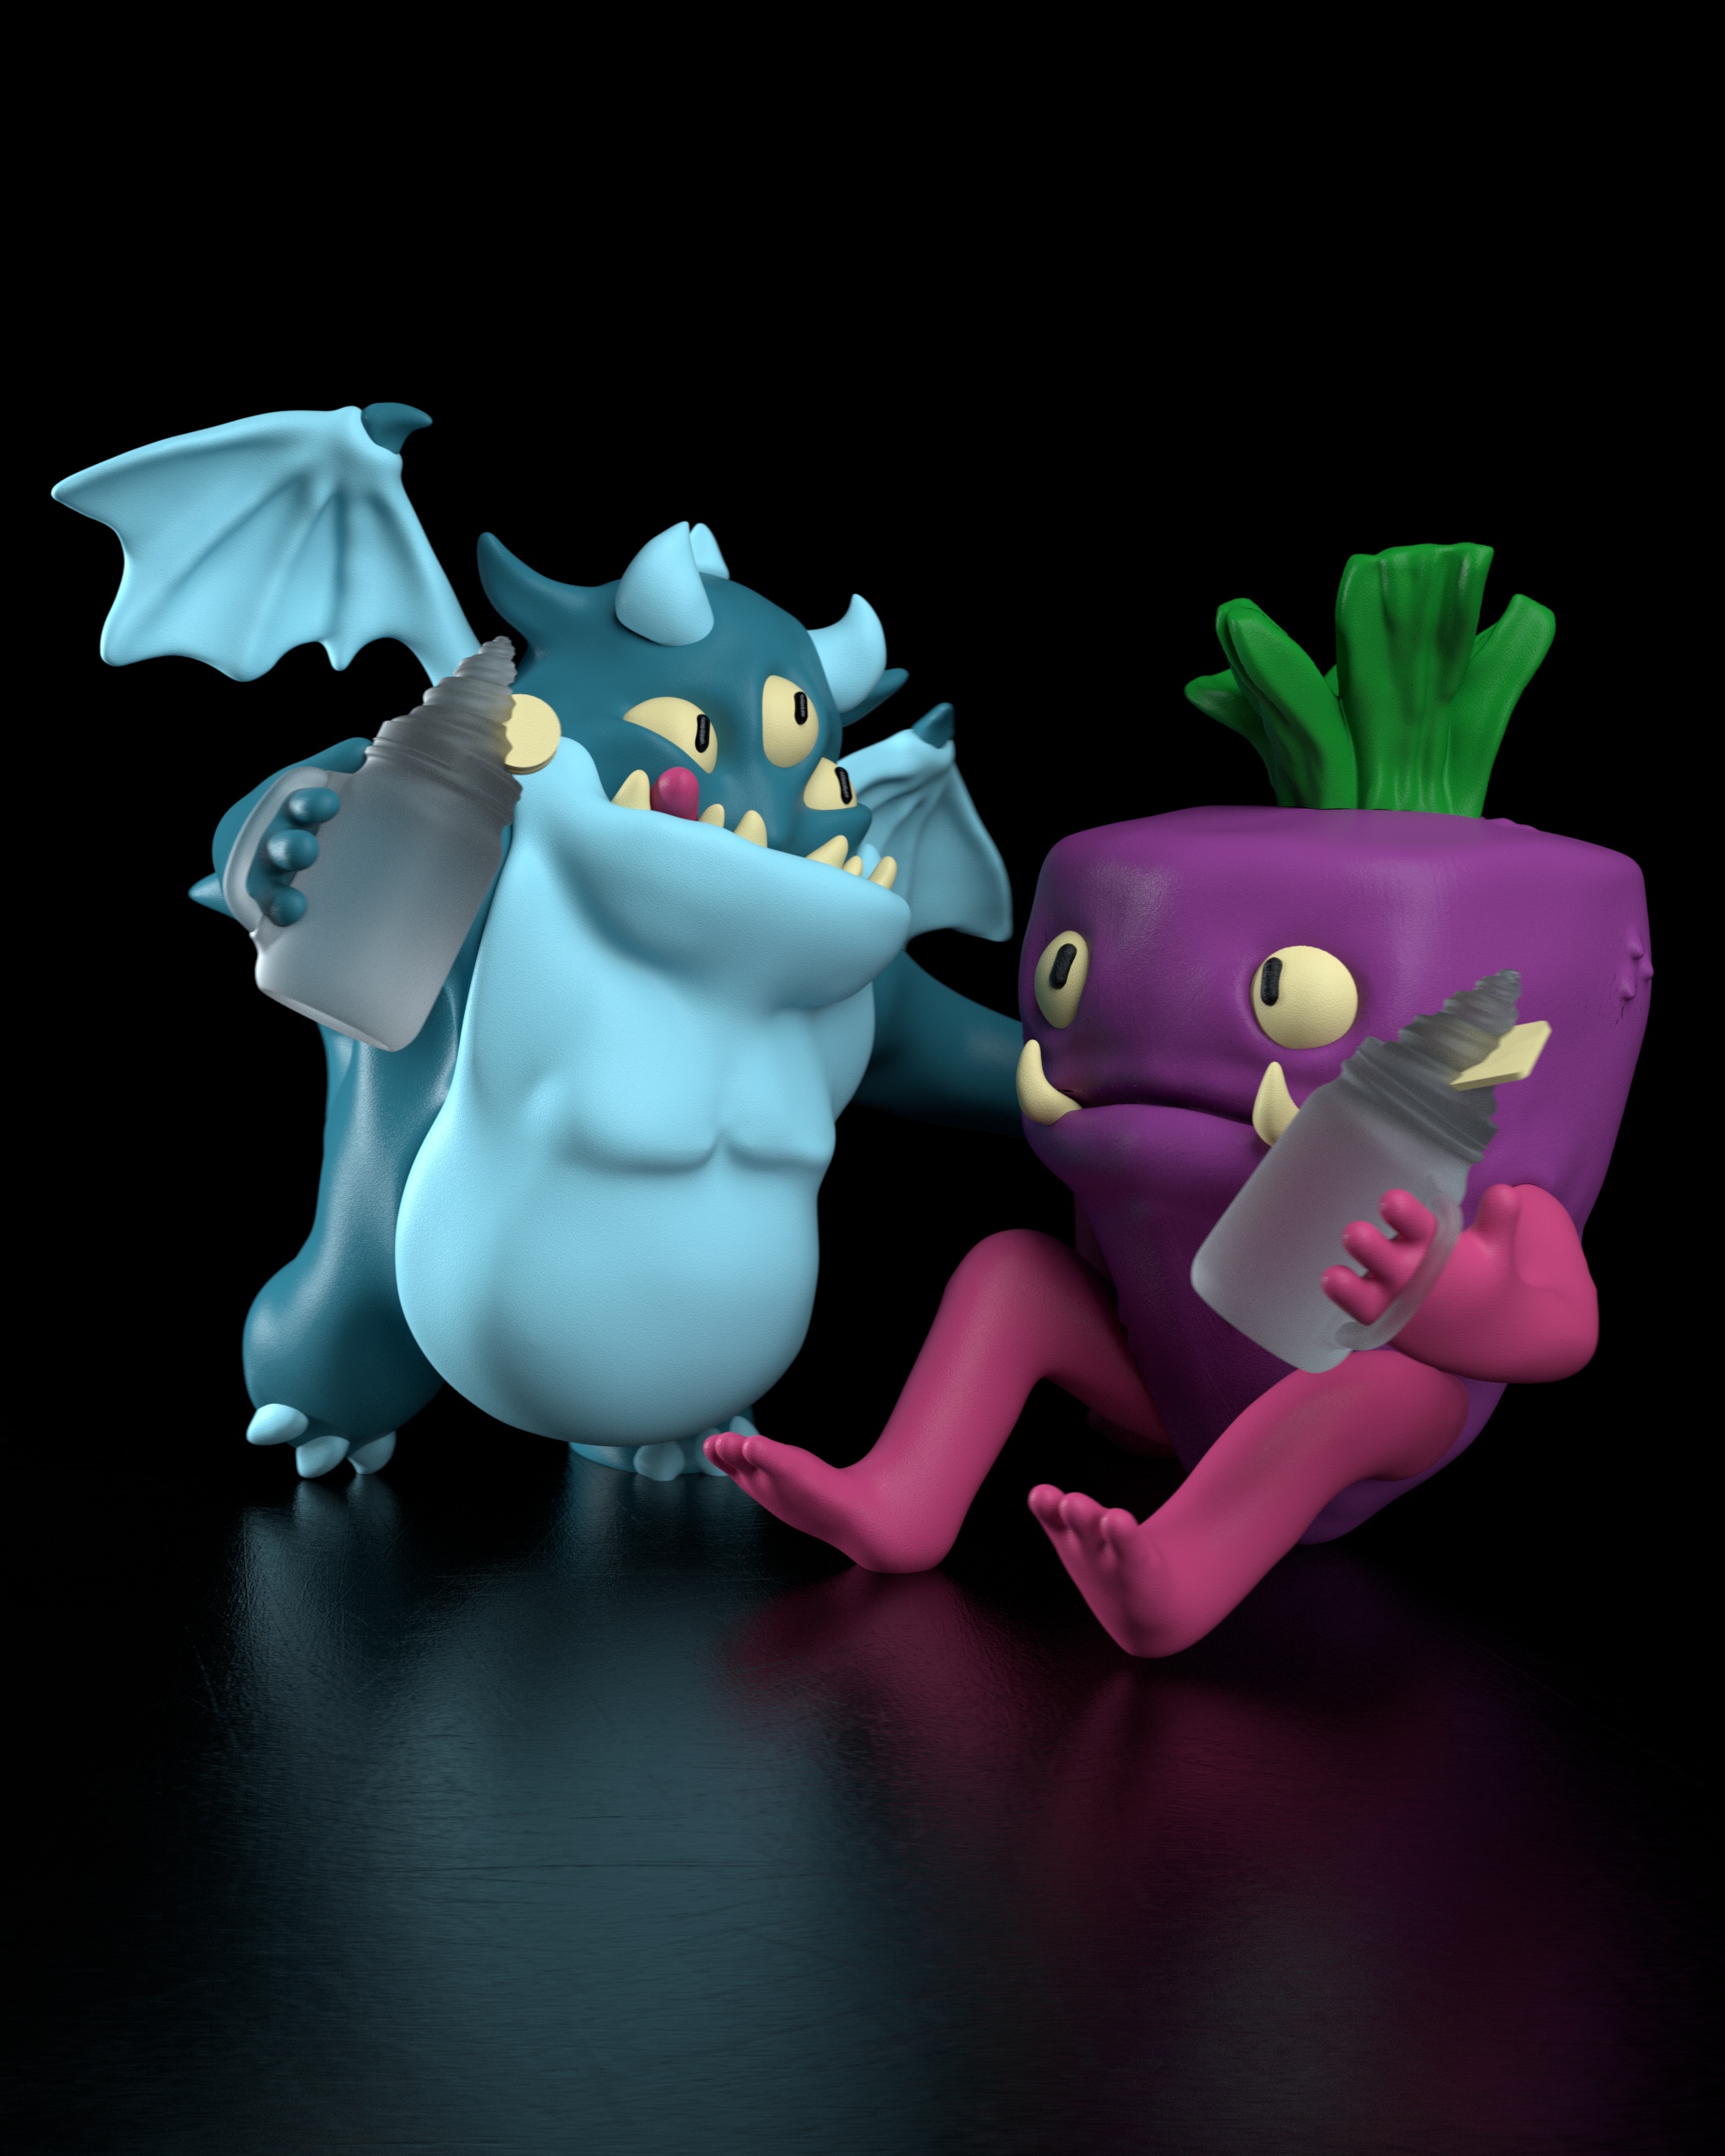 image of a monsters sculptures